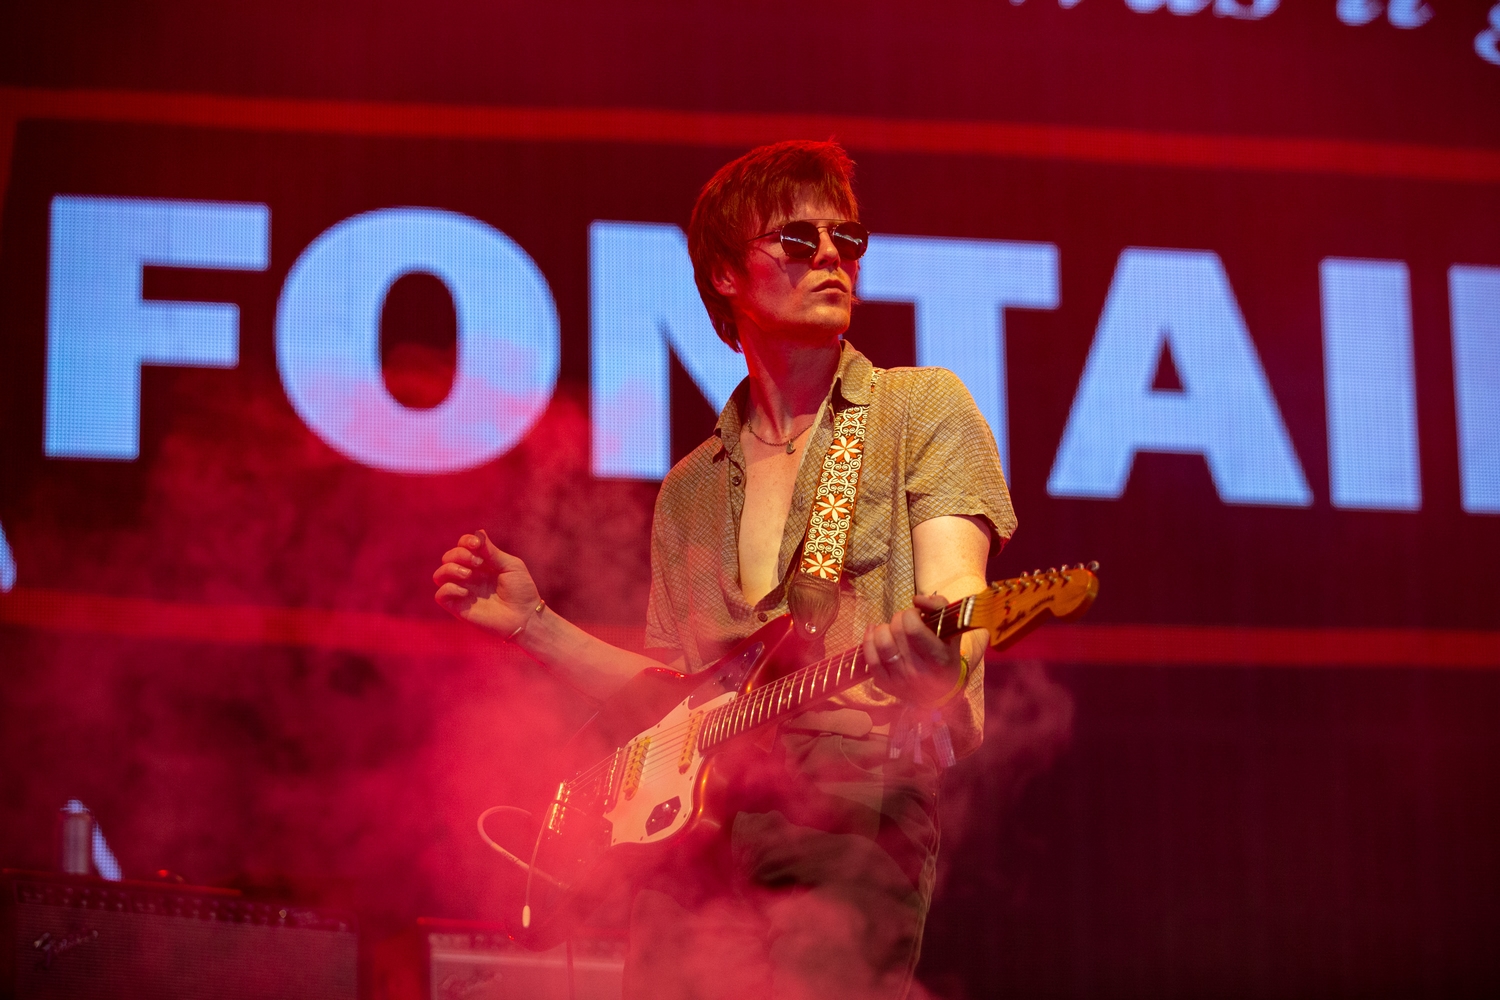 Fontaines DC grab a last-minute opportunity and set the John Peel Stage alight at Glastonbury 2019